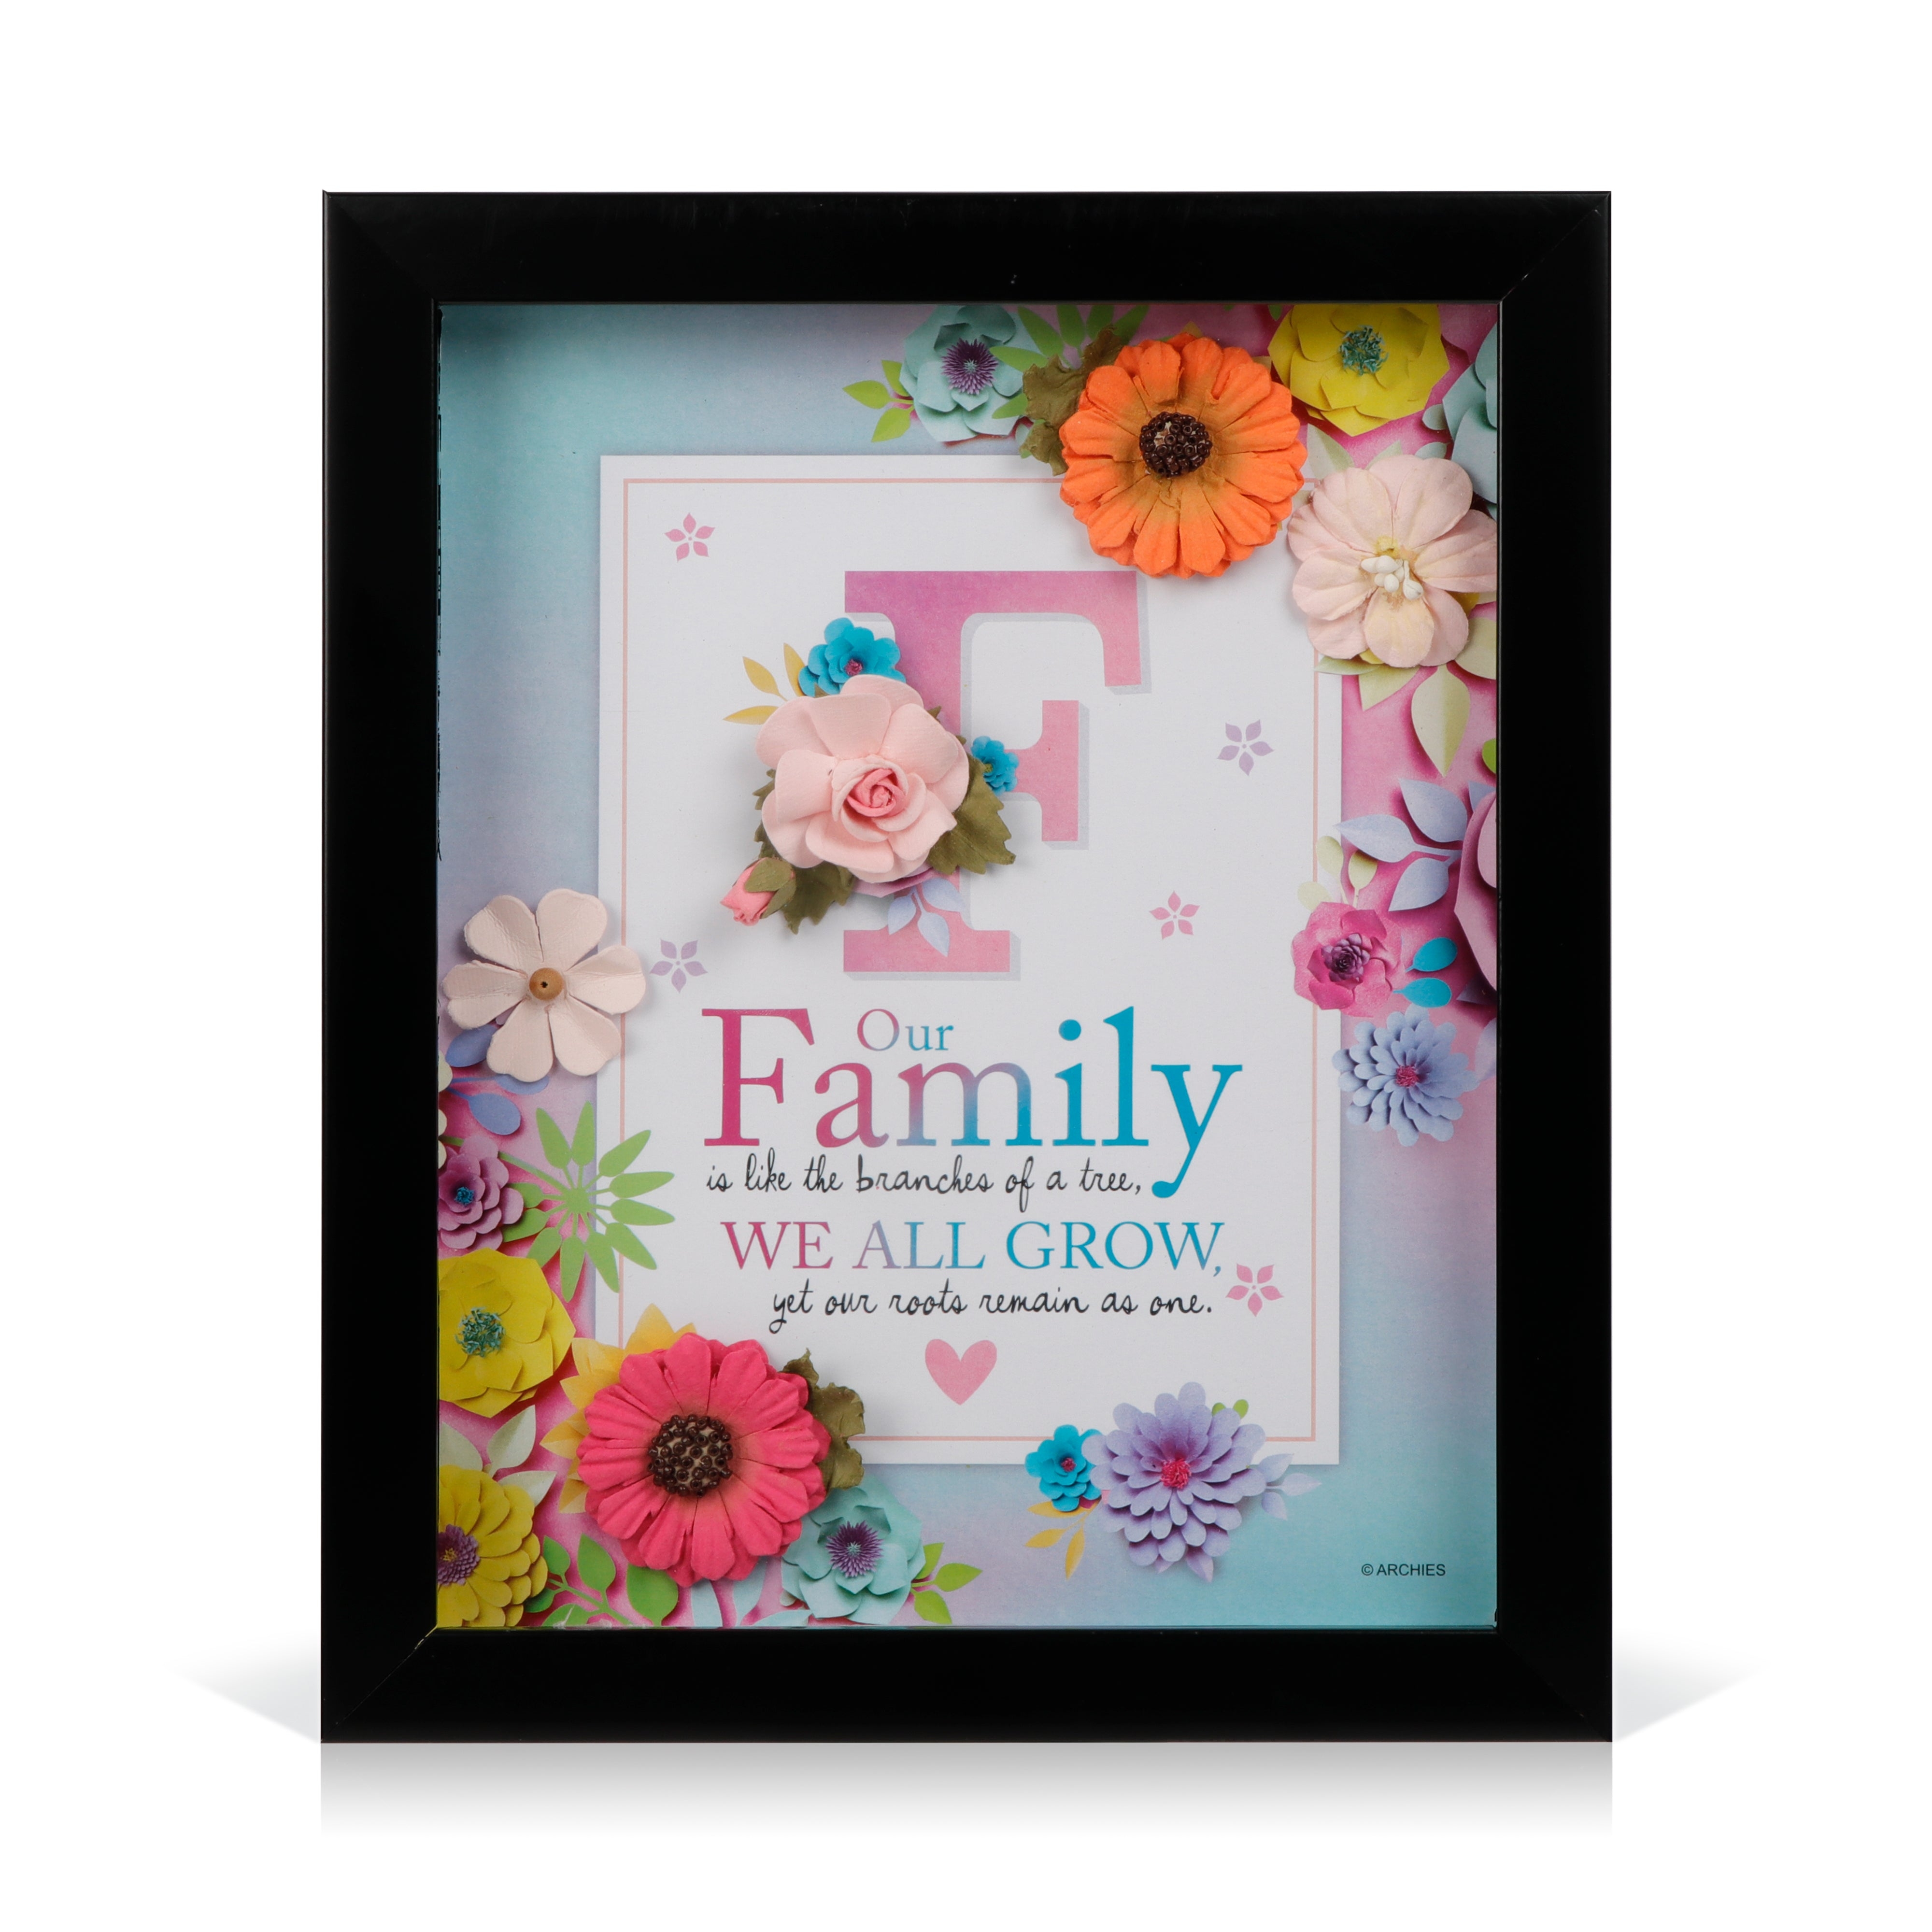 Archies | Archies KEEPSAKE QUOTATION - F.OUR FAMILY IS .... For gifting and Home décor